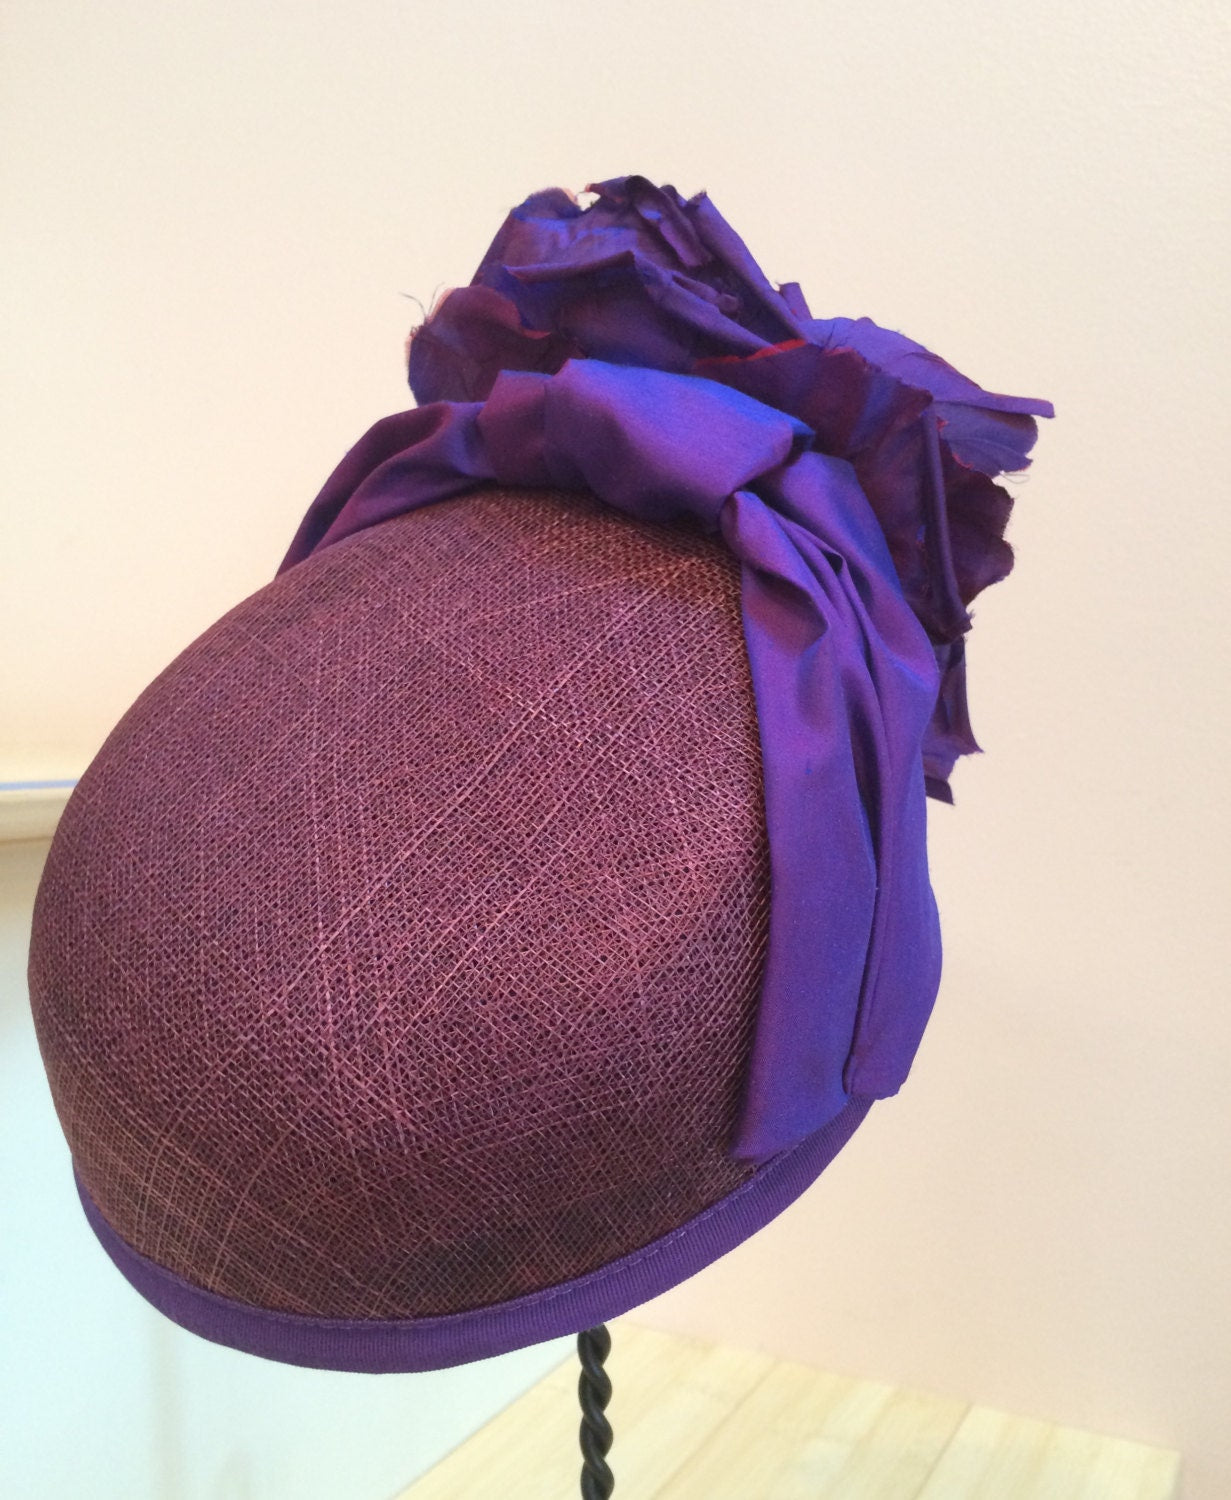 Radiant Orchid Sinamay Pillbox hat, Purple Flower, Church hat, Mother of the Bride or Derby Race Hat-Evening Cocktail Hat-Purple Summer Hat-